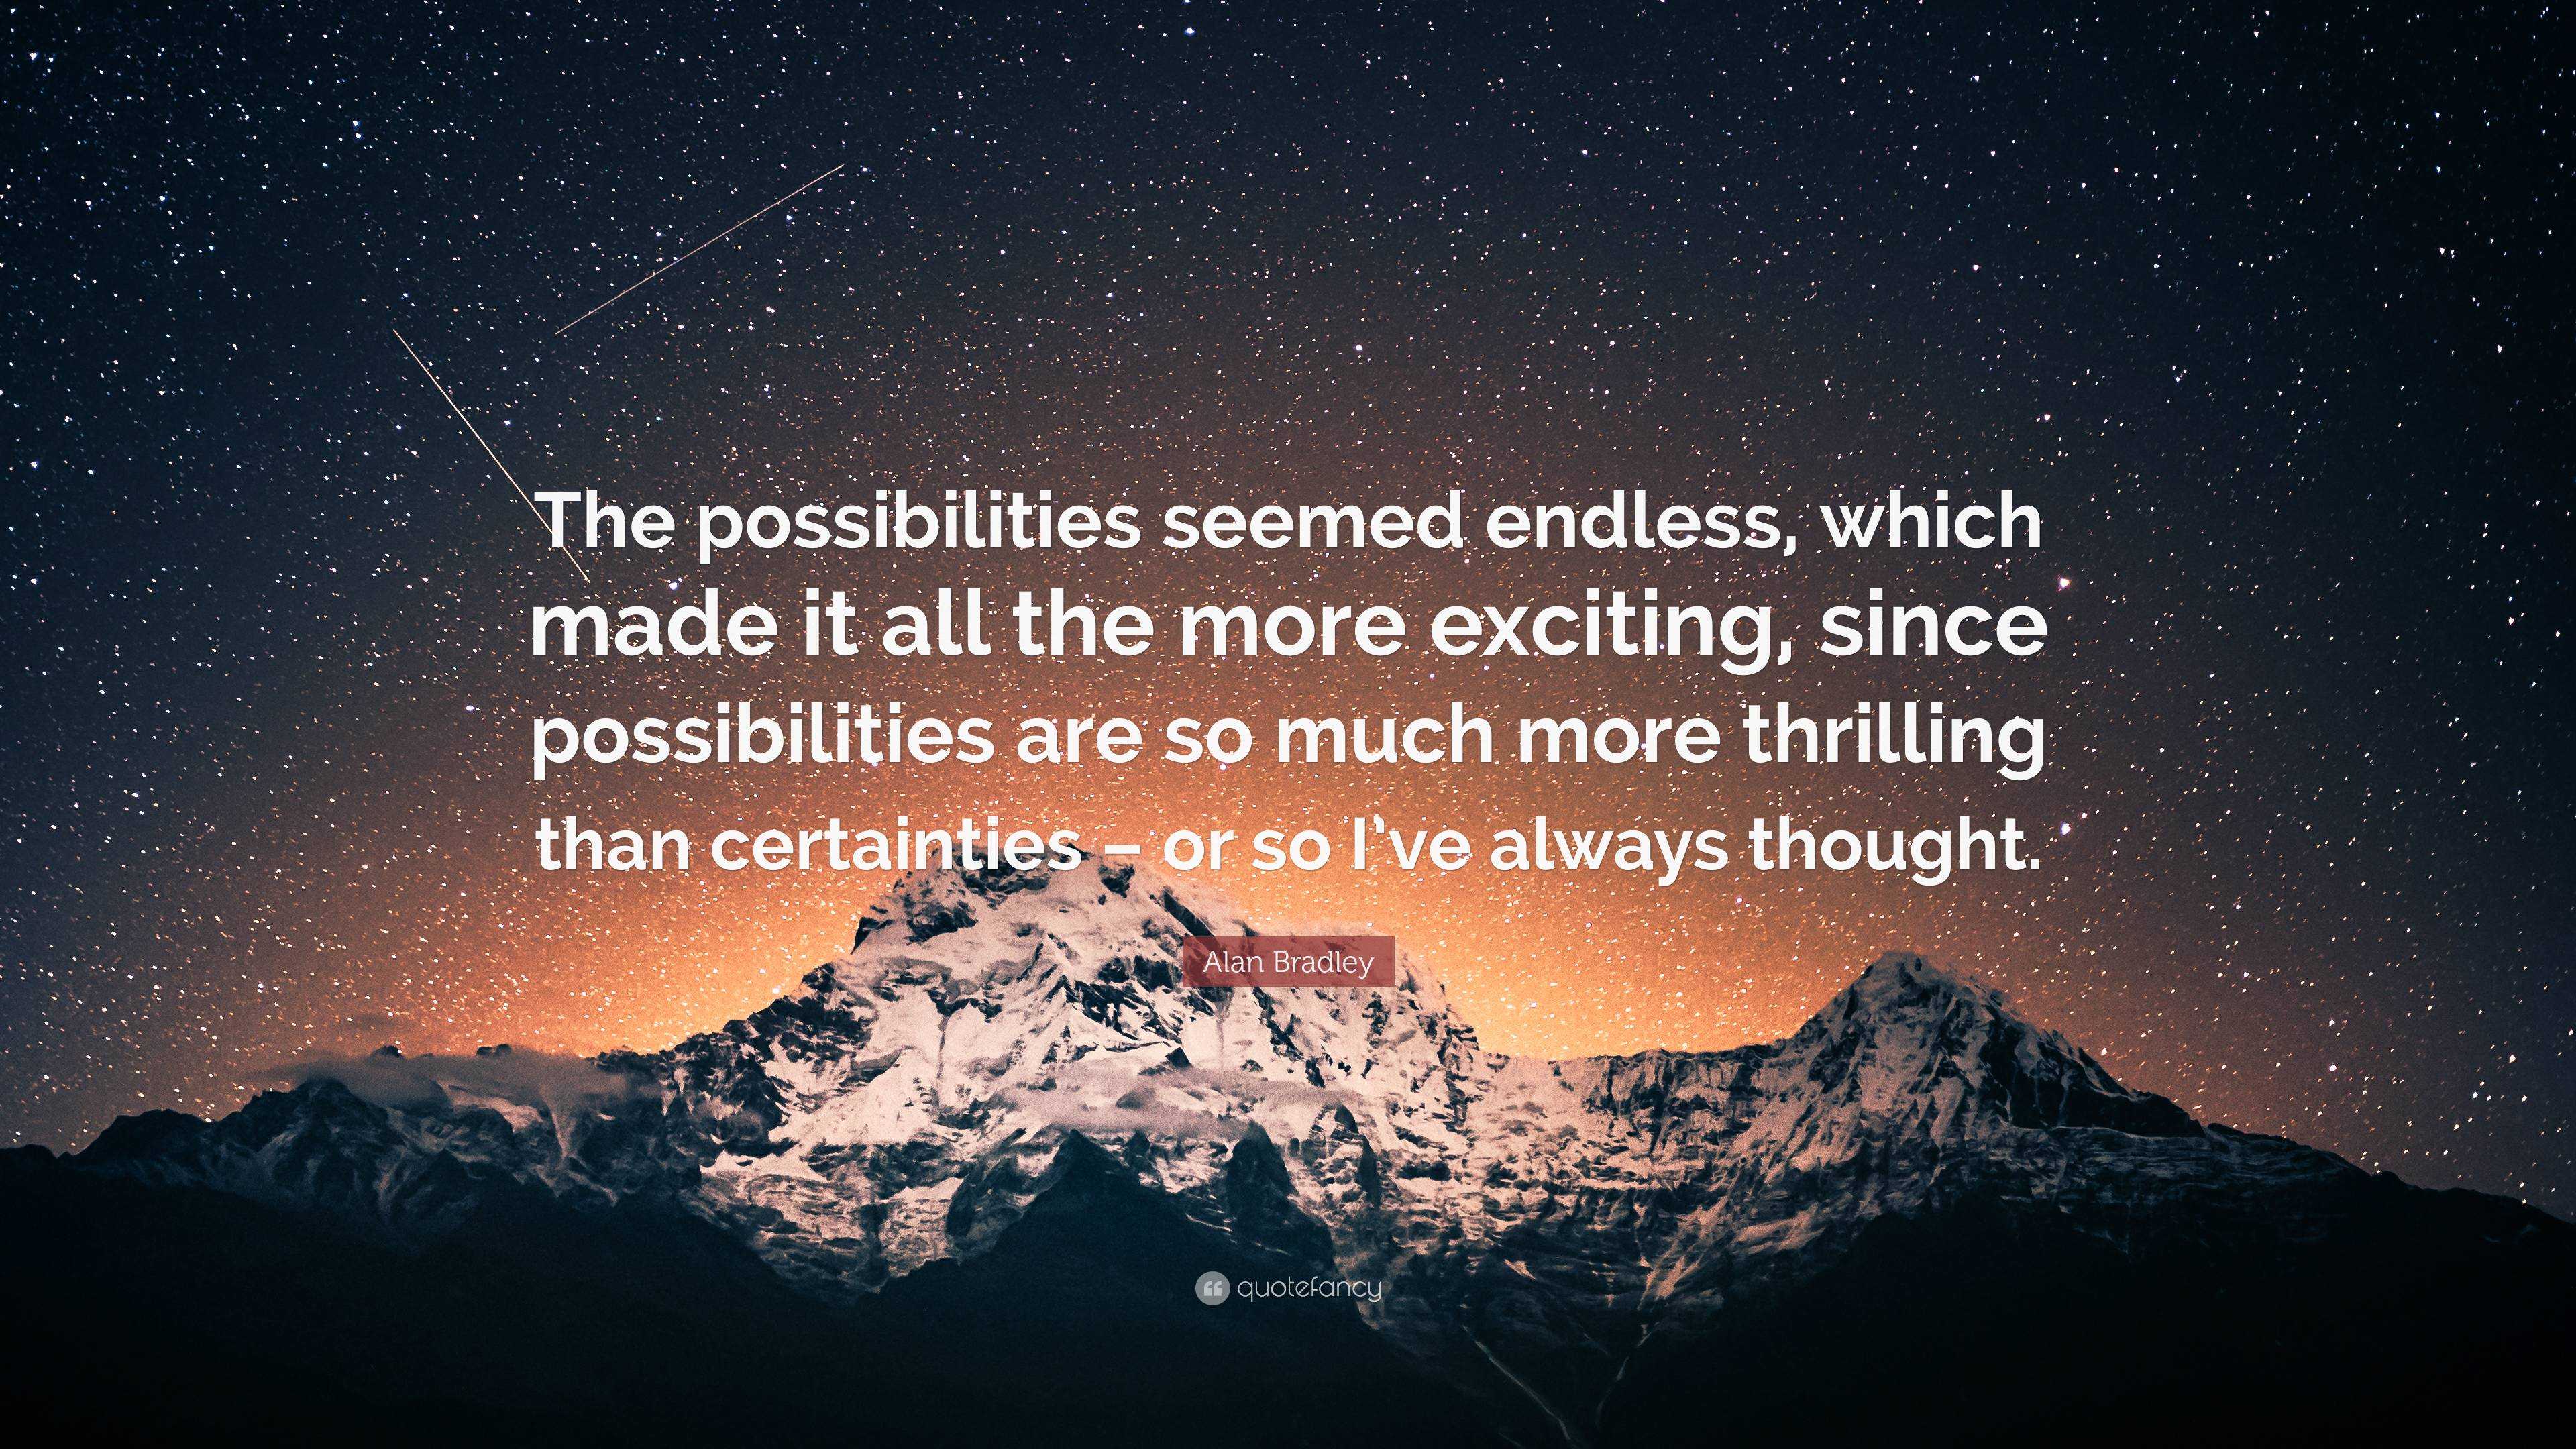 Alan Bradley Quote: “The possibilities seemed endless, which